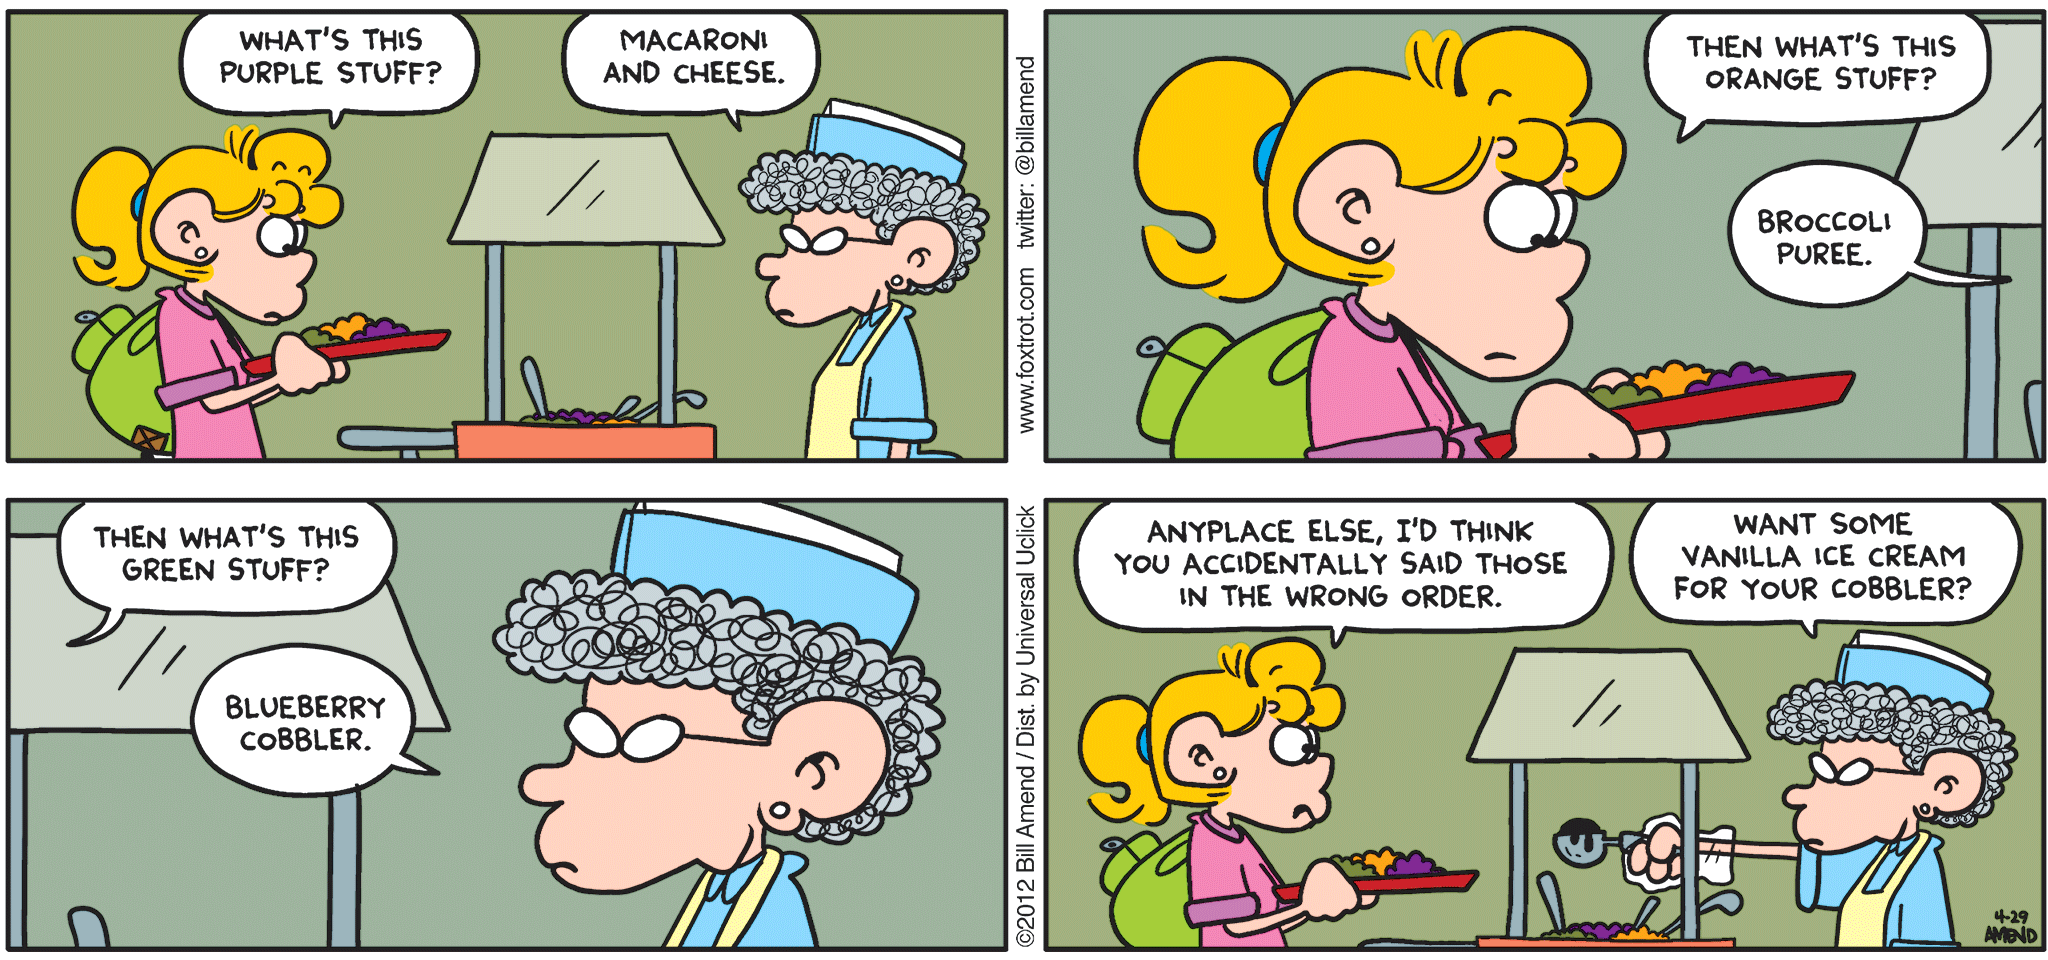 FoxTrot comic strip by Bill Amend - "Food Coloring" published April 29, 2012 - Paige: What's this purple stuff? woman: Macaroni and cheese. Paige: Then what's this orange stuff? woman: Broccoli puree. Paige: Then what's this green stuff? woman: Blueberry cobbler. Paige: Anyplace else, I'd think you accidentally said those in the wrong order. woman: Want some vanilla ice cream for your cobbler?